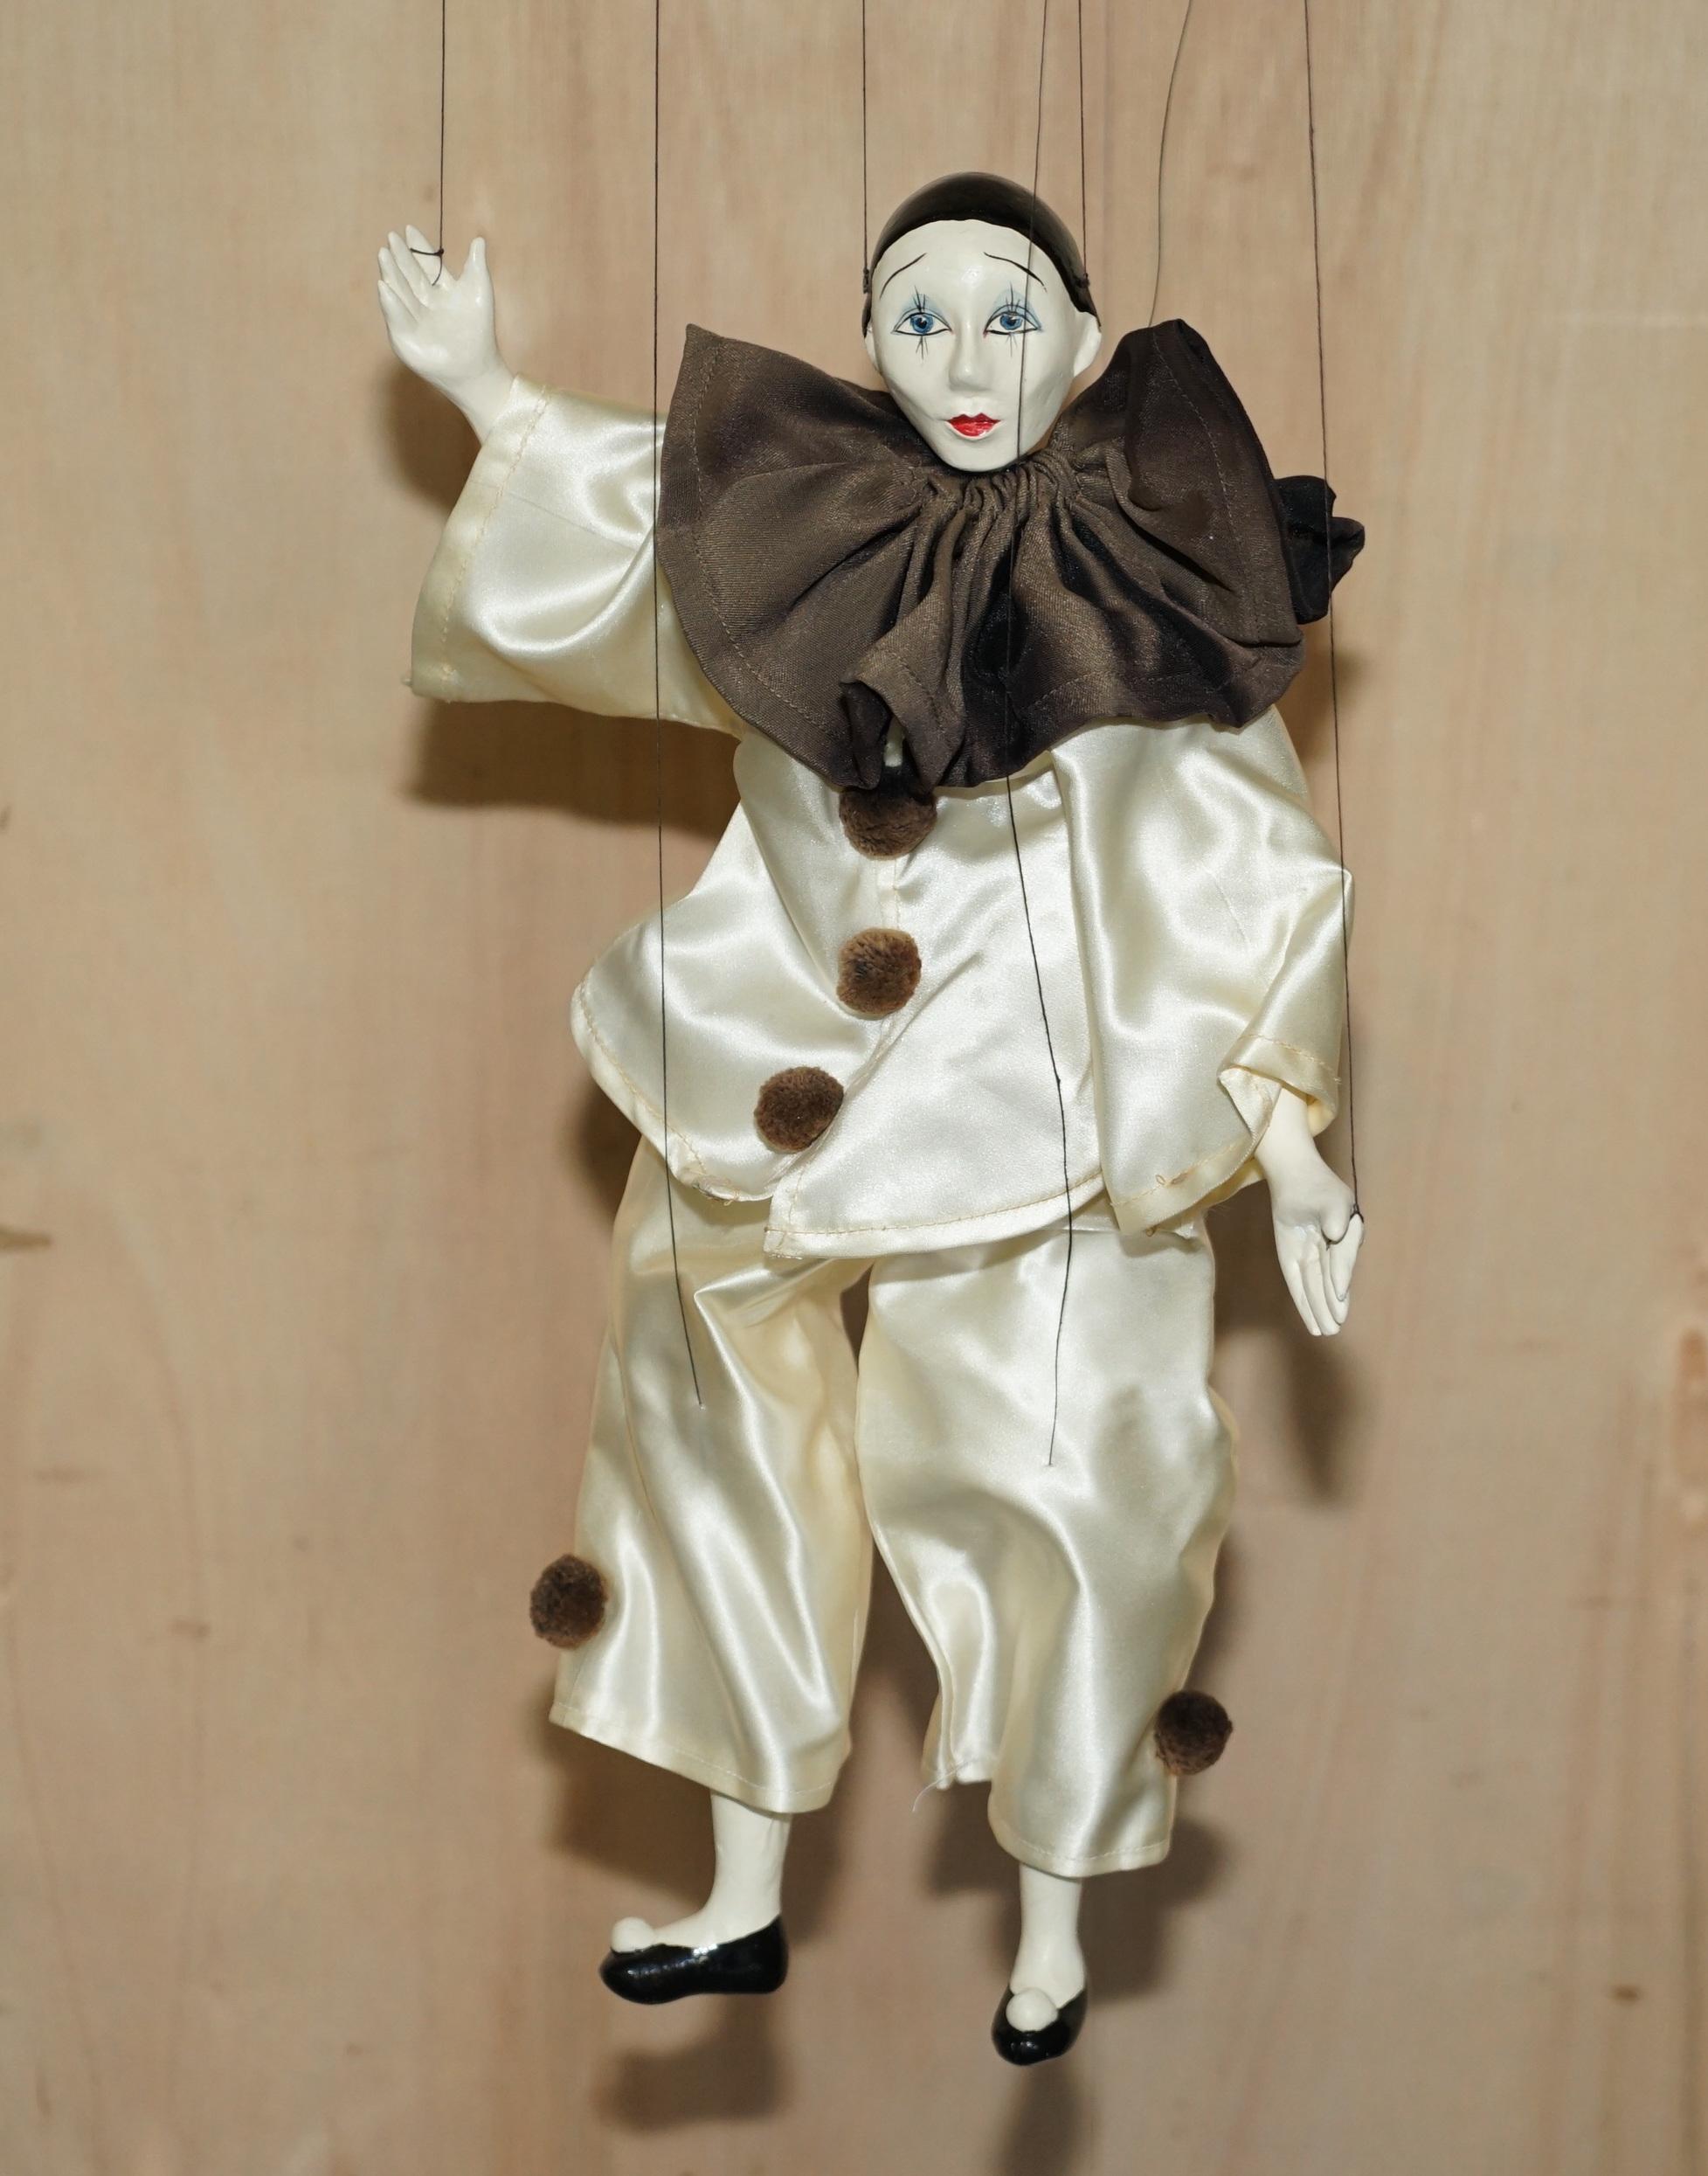 Original New Old Stock Circa 1900 Liberty's London Marionette String Puppet For Sale 2